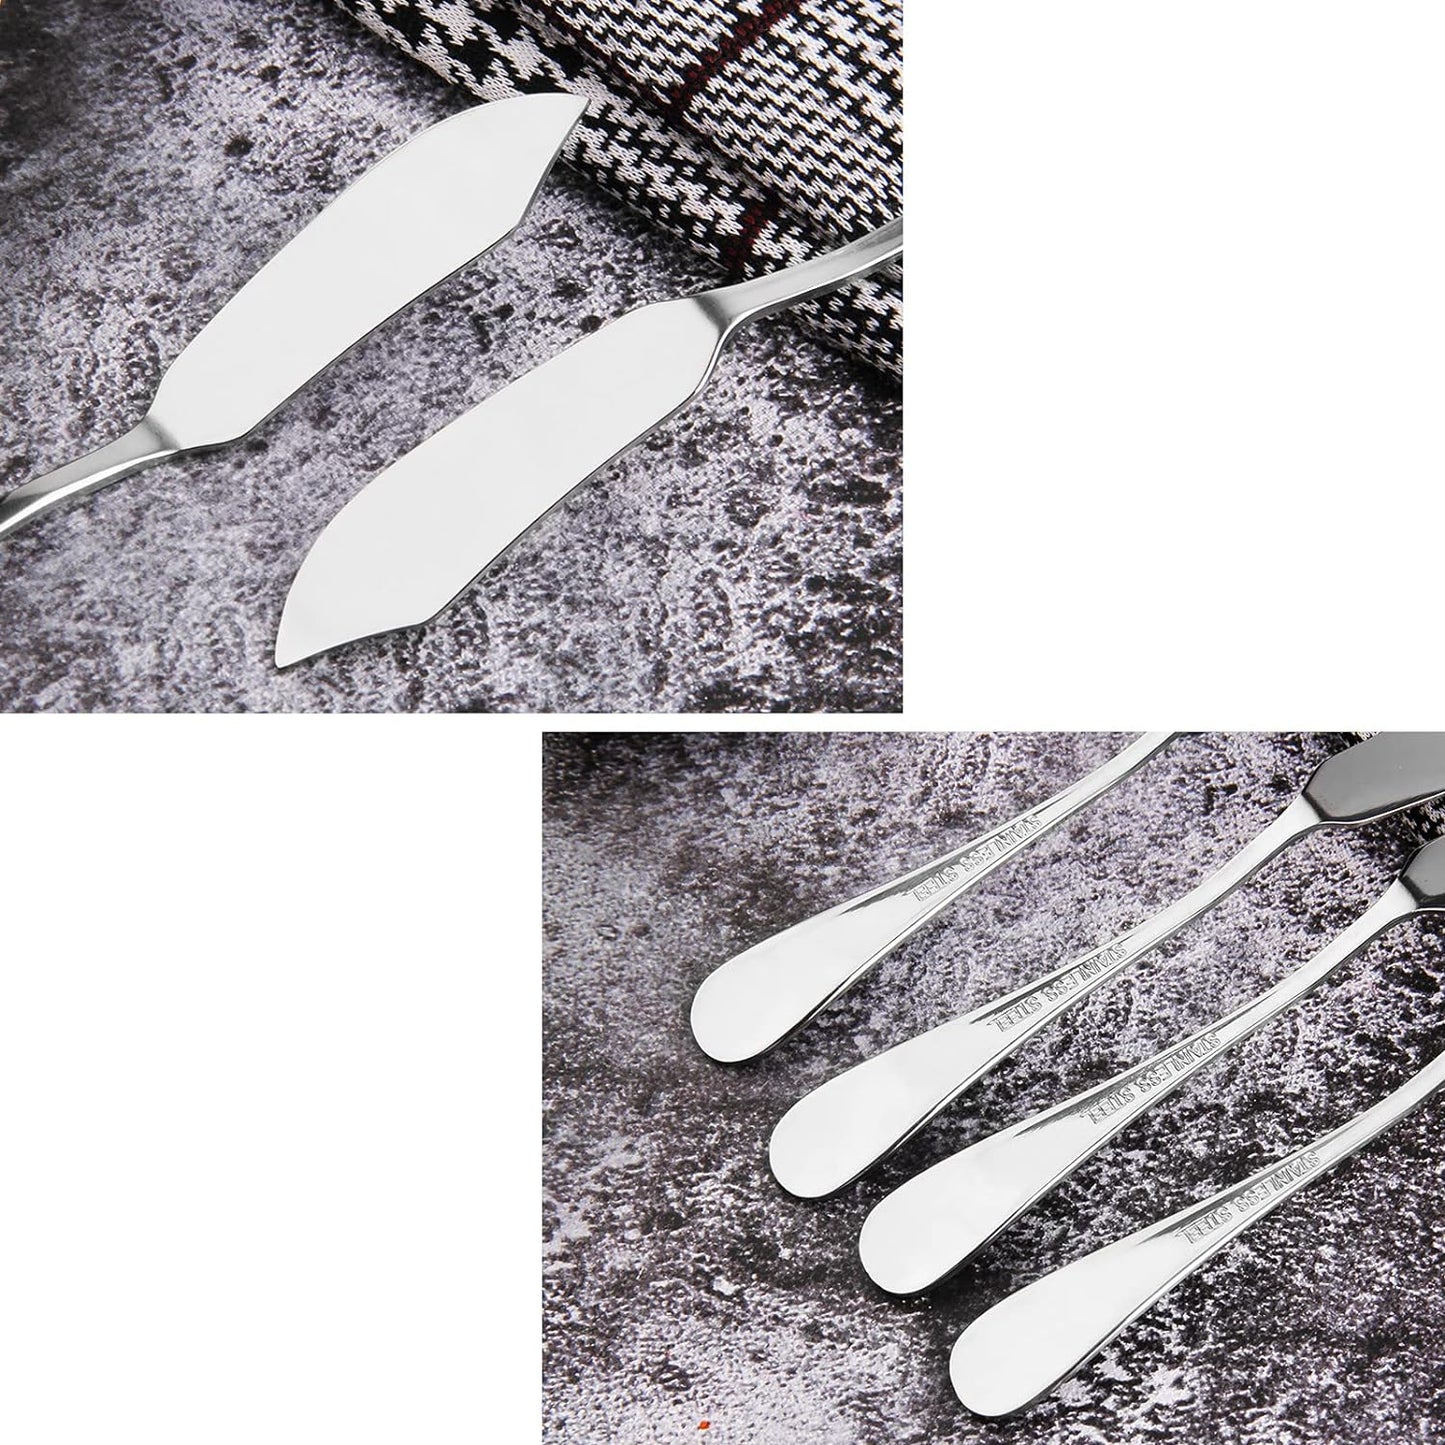 6pcs Stainless Steel Butter Knife, Cheese/Butter Spreaders, Breakfast Spreads Knives,Cheese and Condiments(Silver